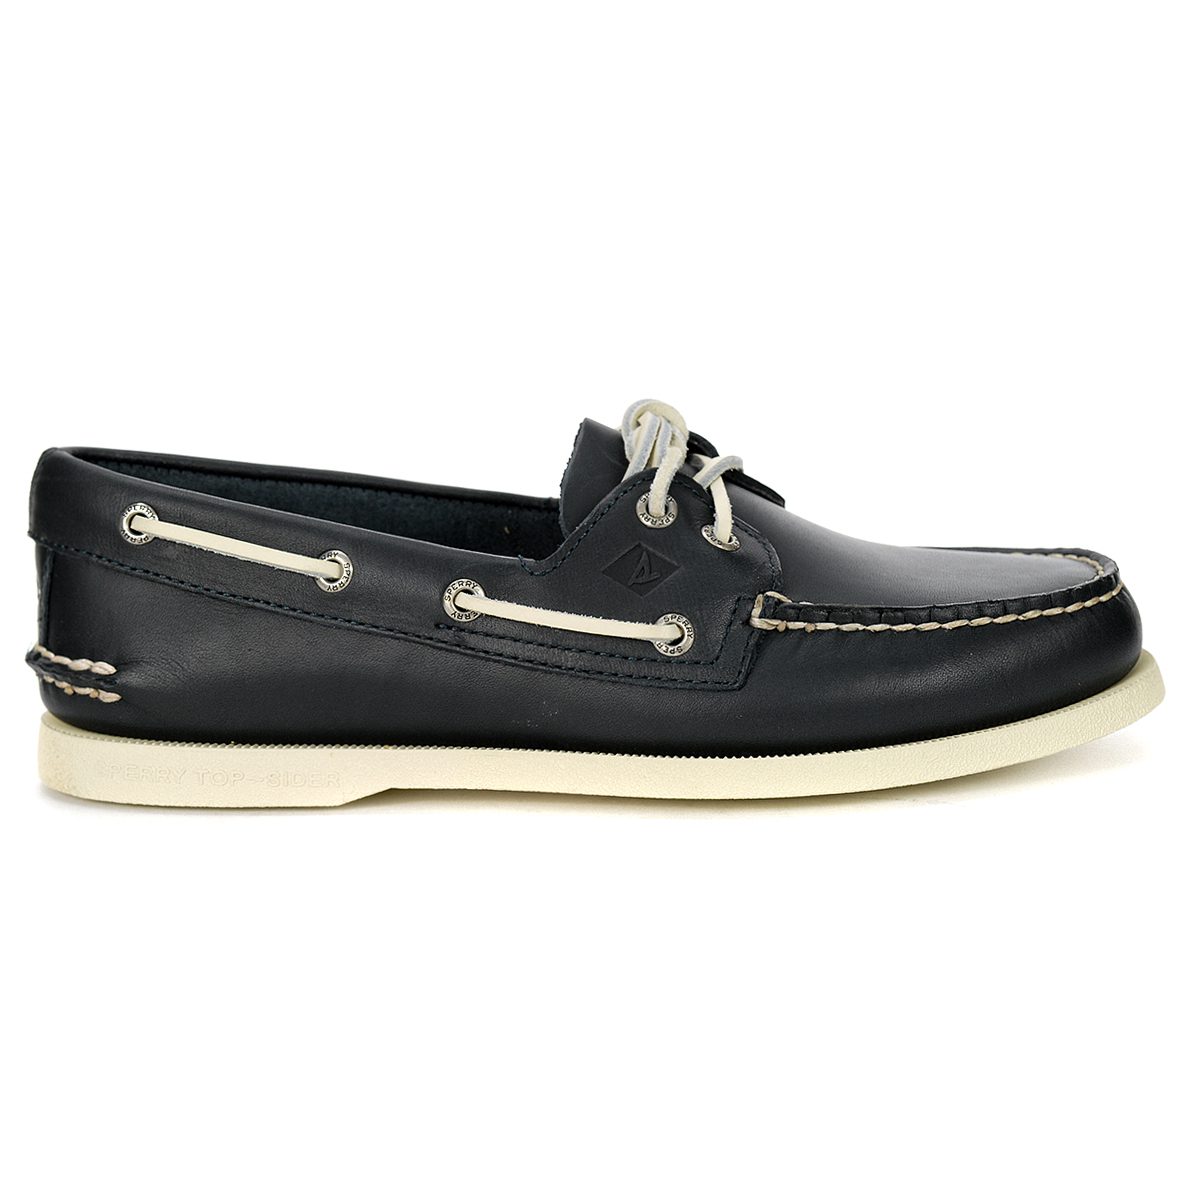 Sperry Top-Sider Men's Authentic 